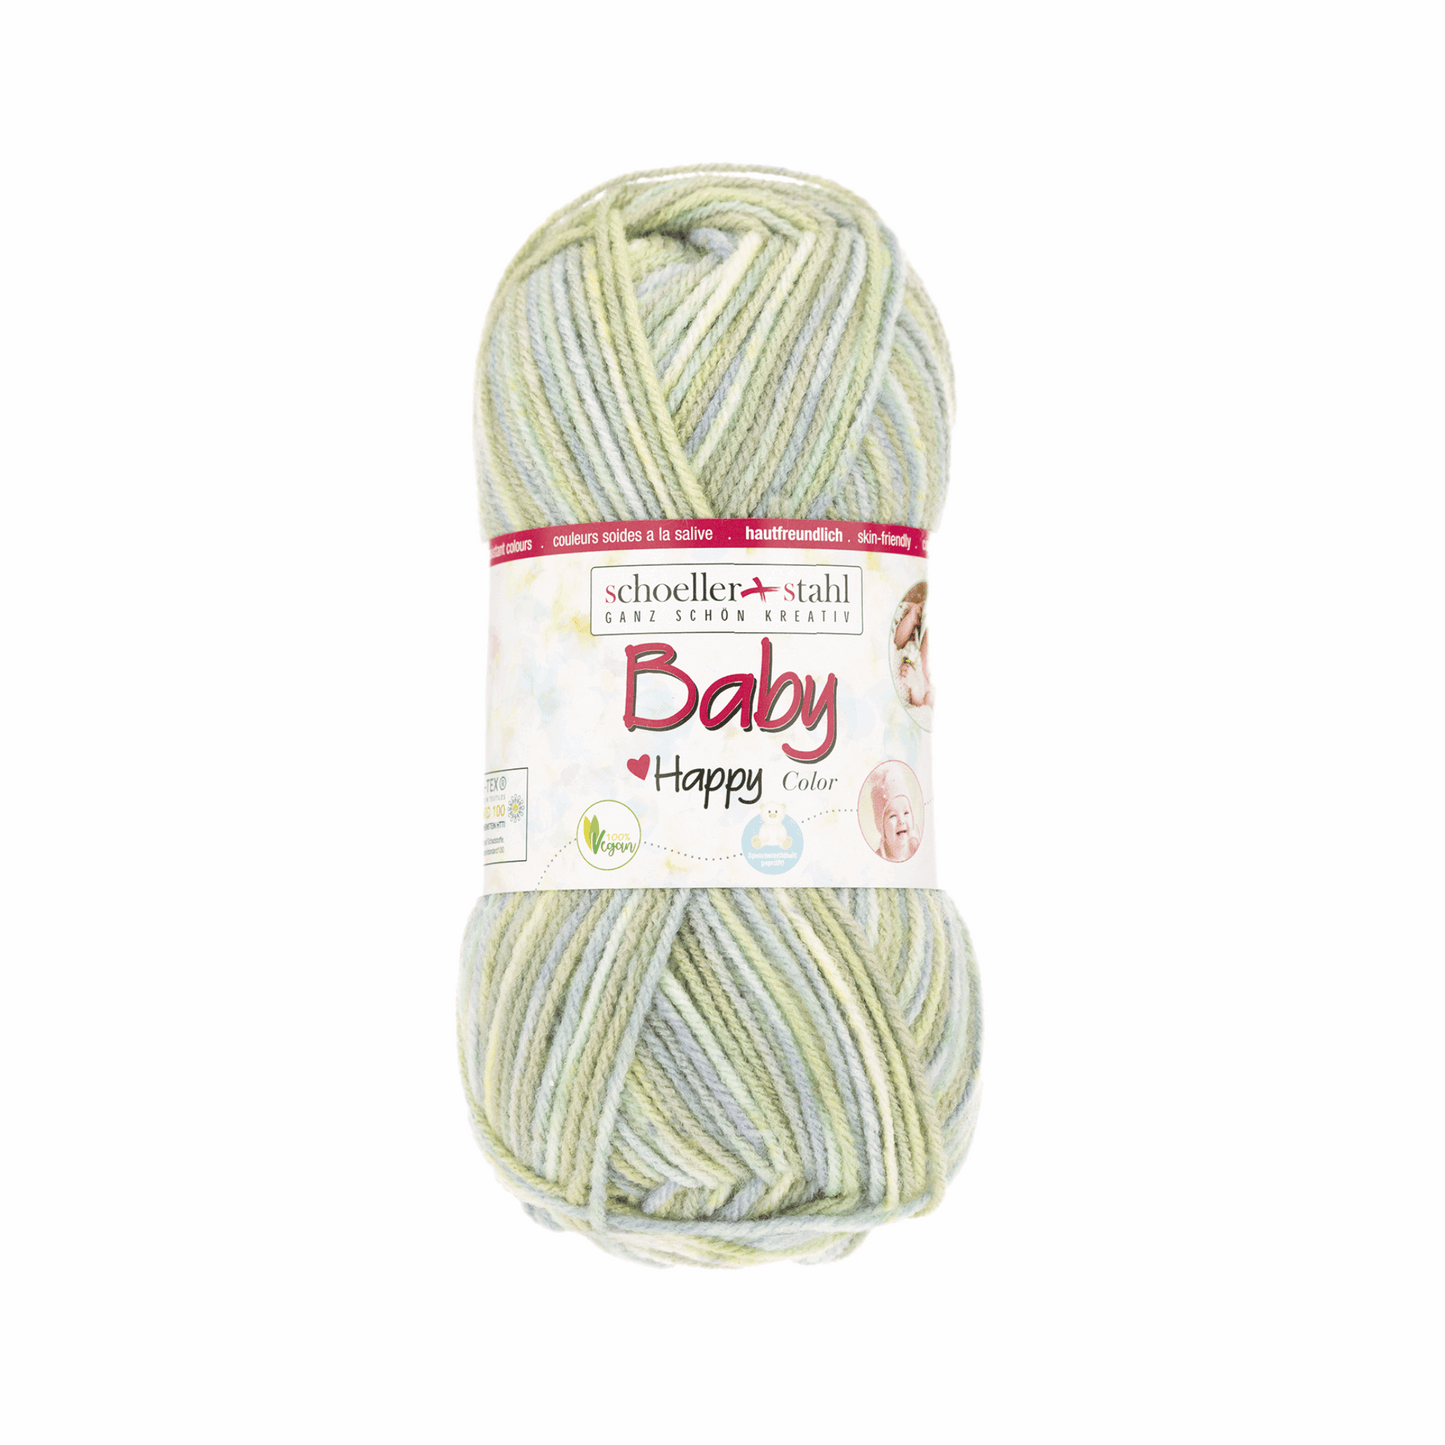 Baby happy color 50g, 90280, Farbe 118, frühling